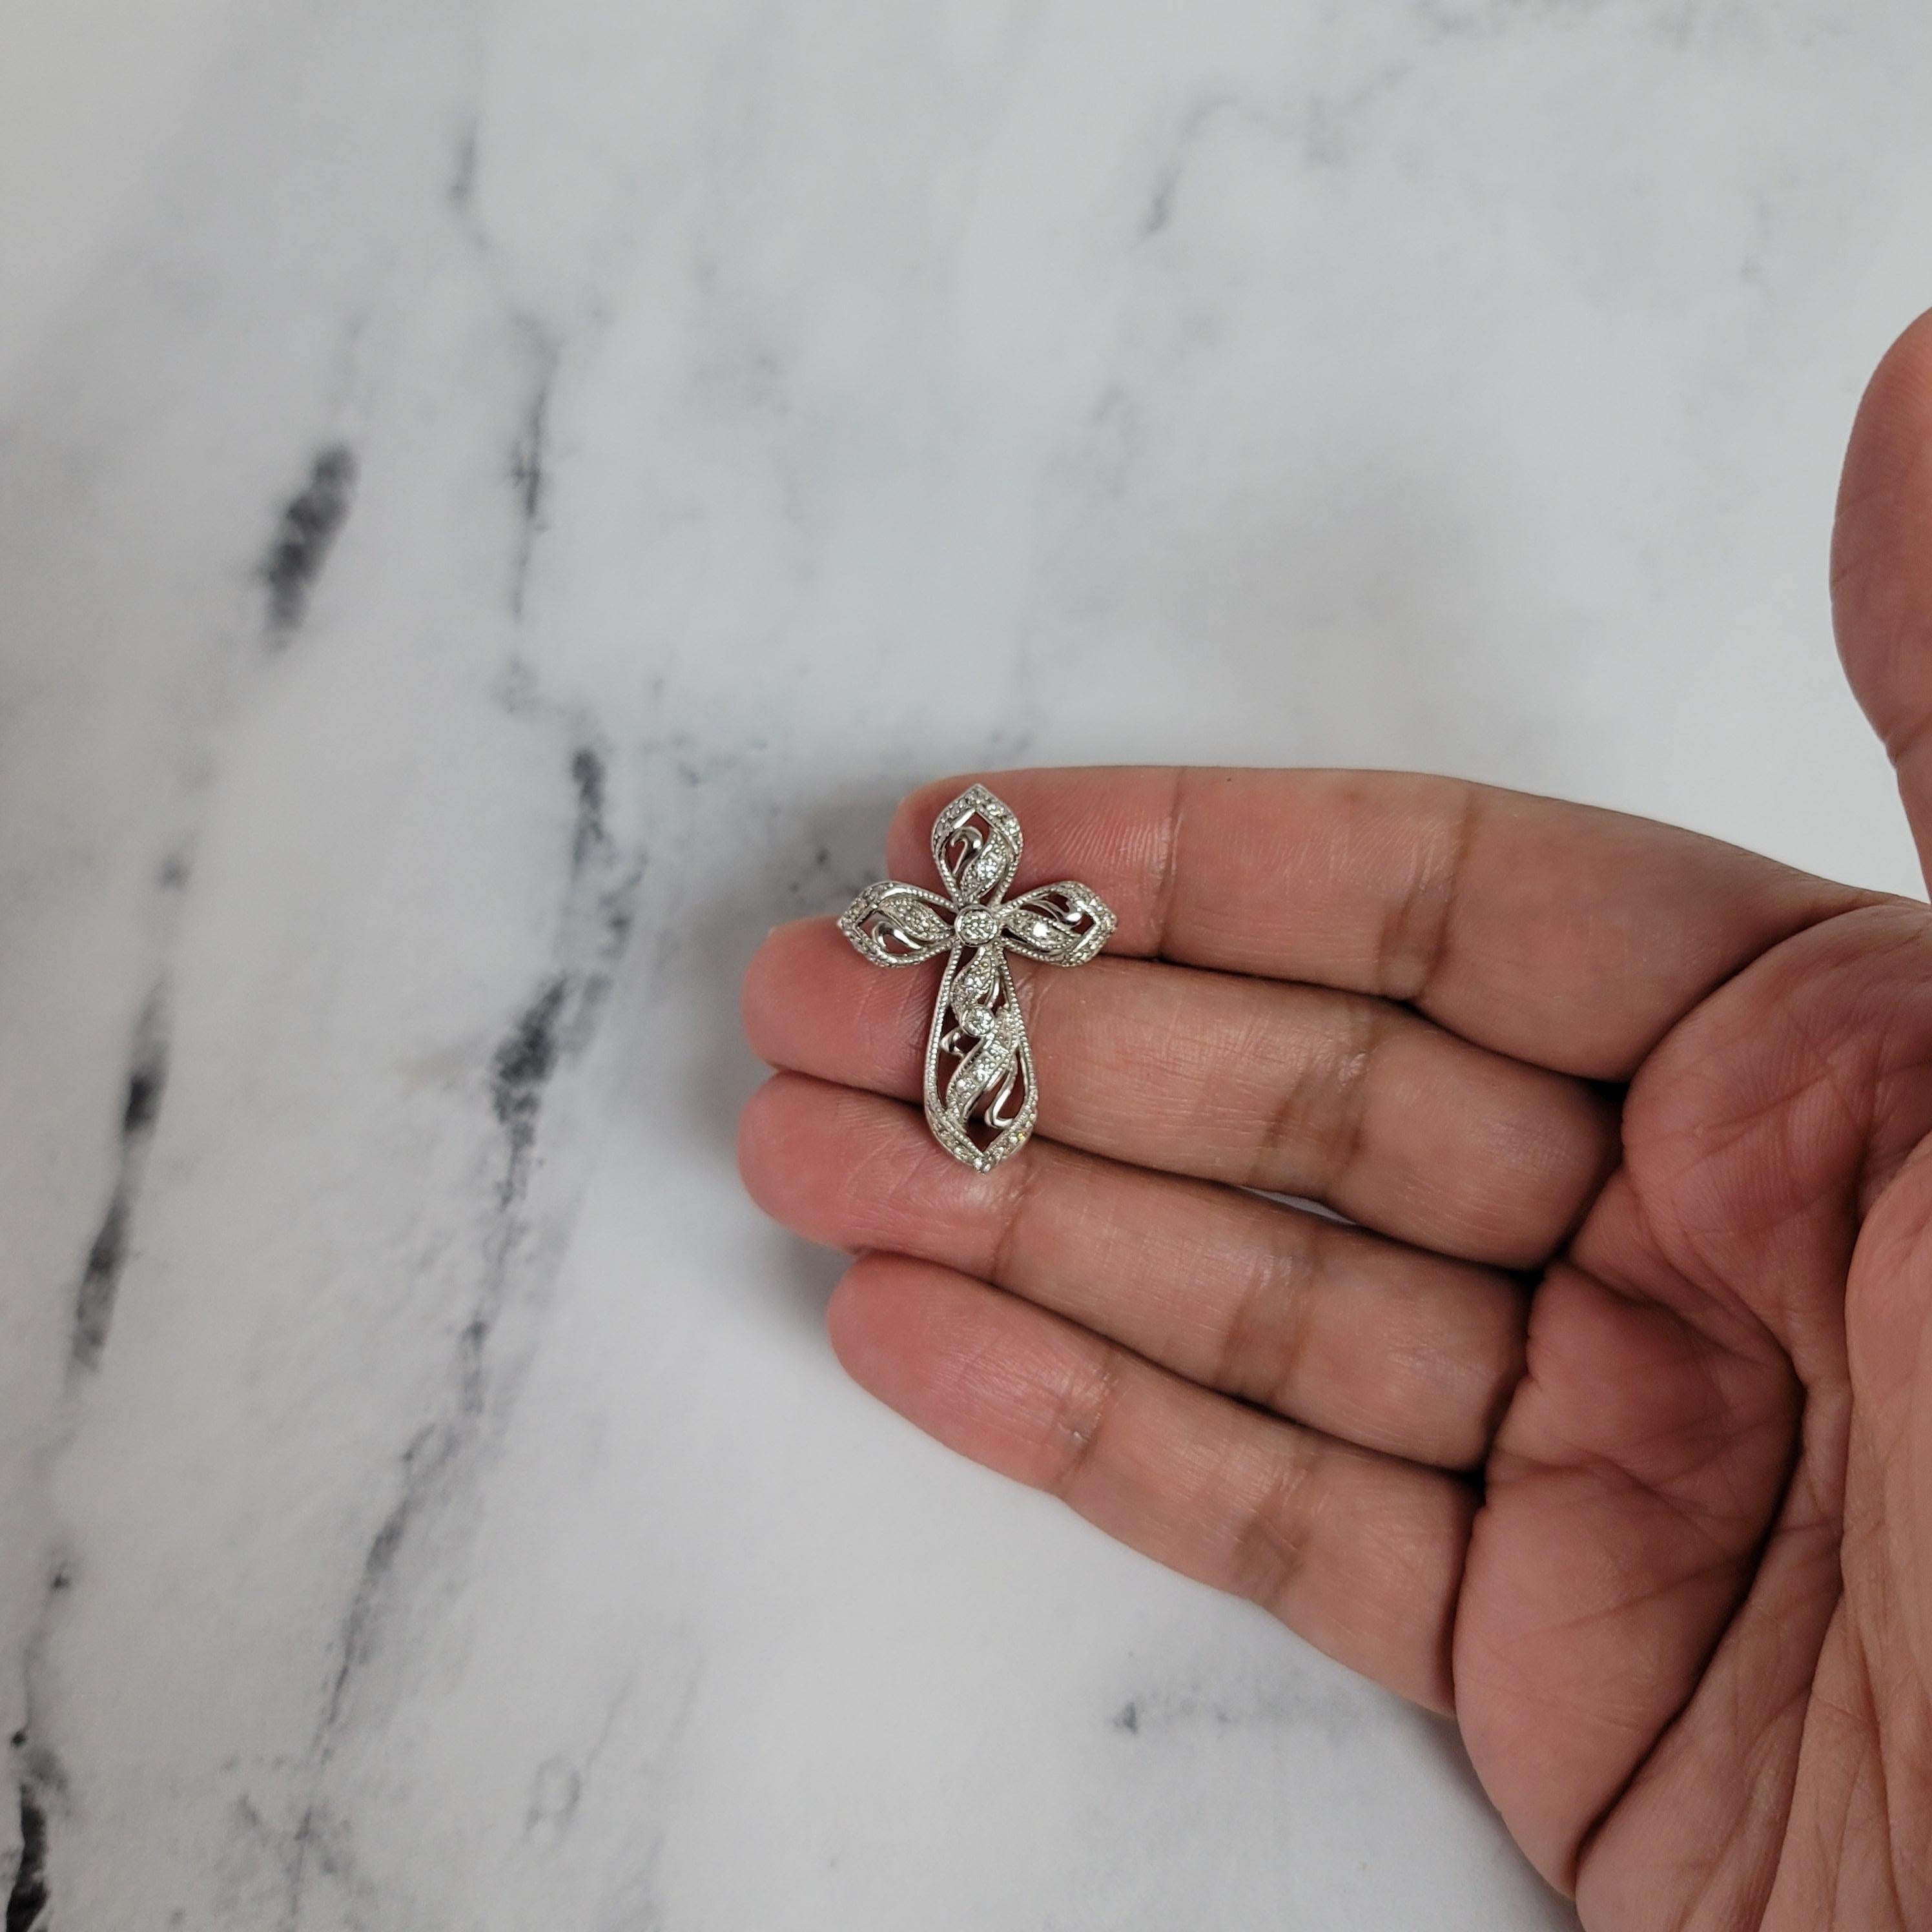 Vintage Style Diamond Cross Pendant .50cttw 14k White Gold In New Condition For Sale In Sugar Land, TX